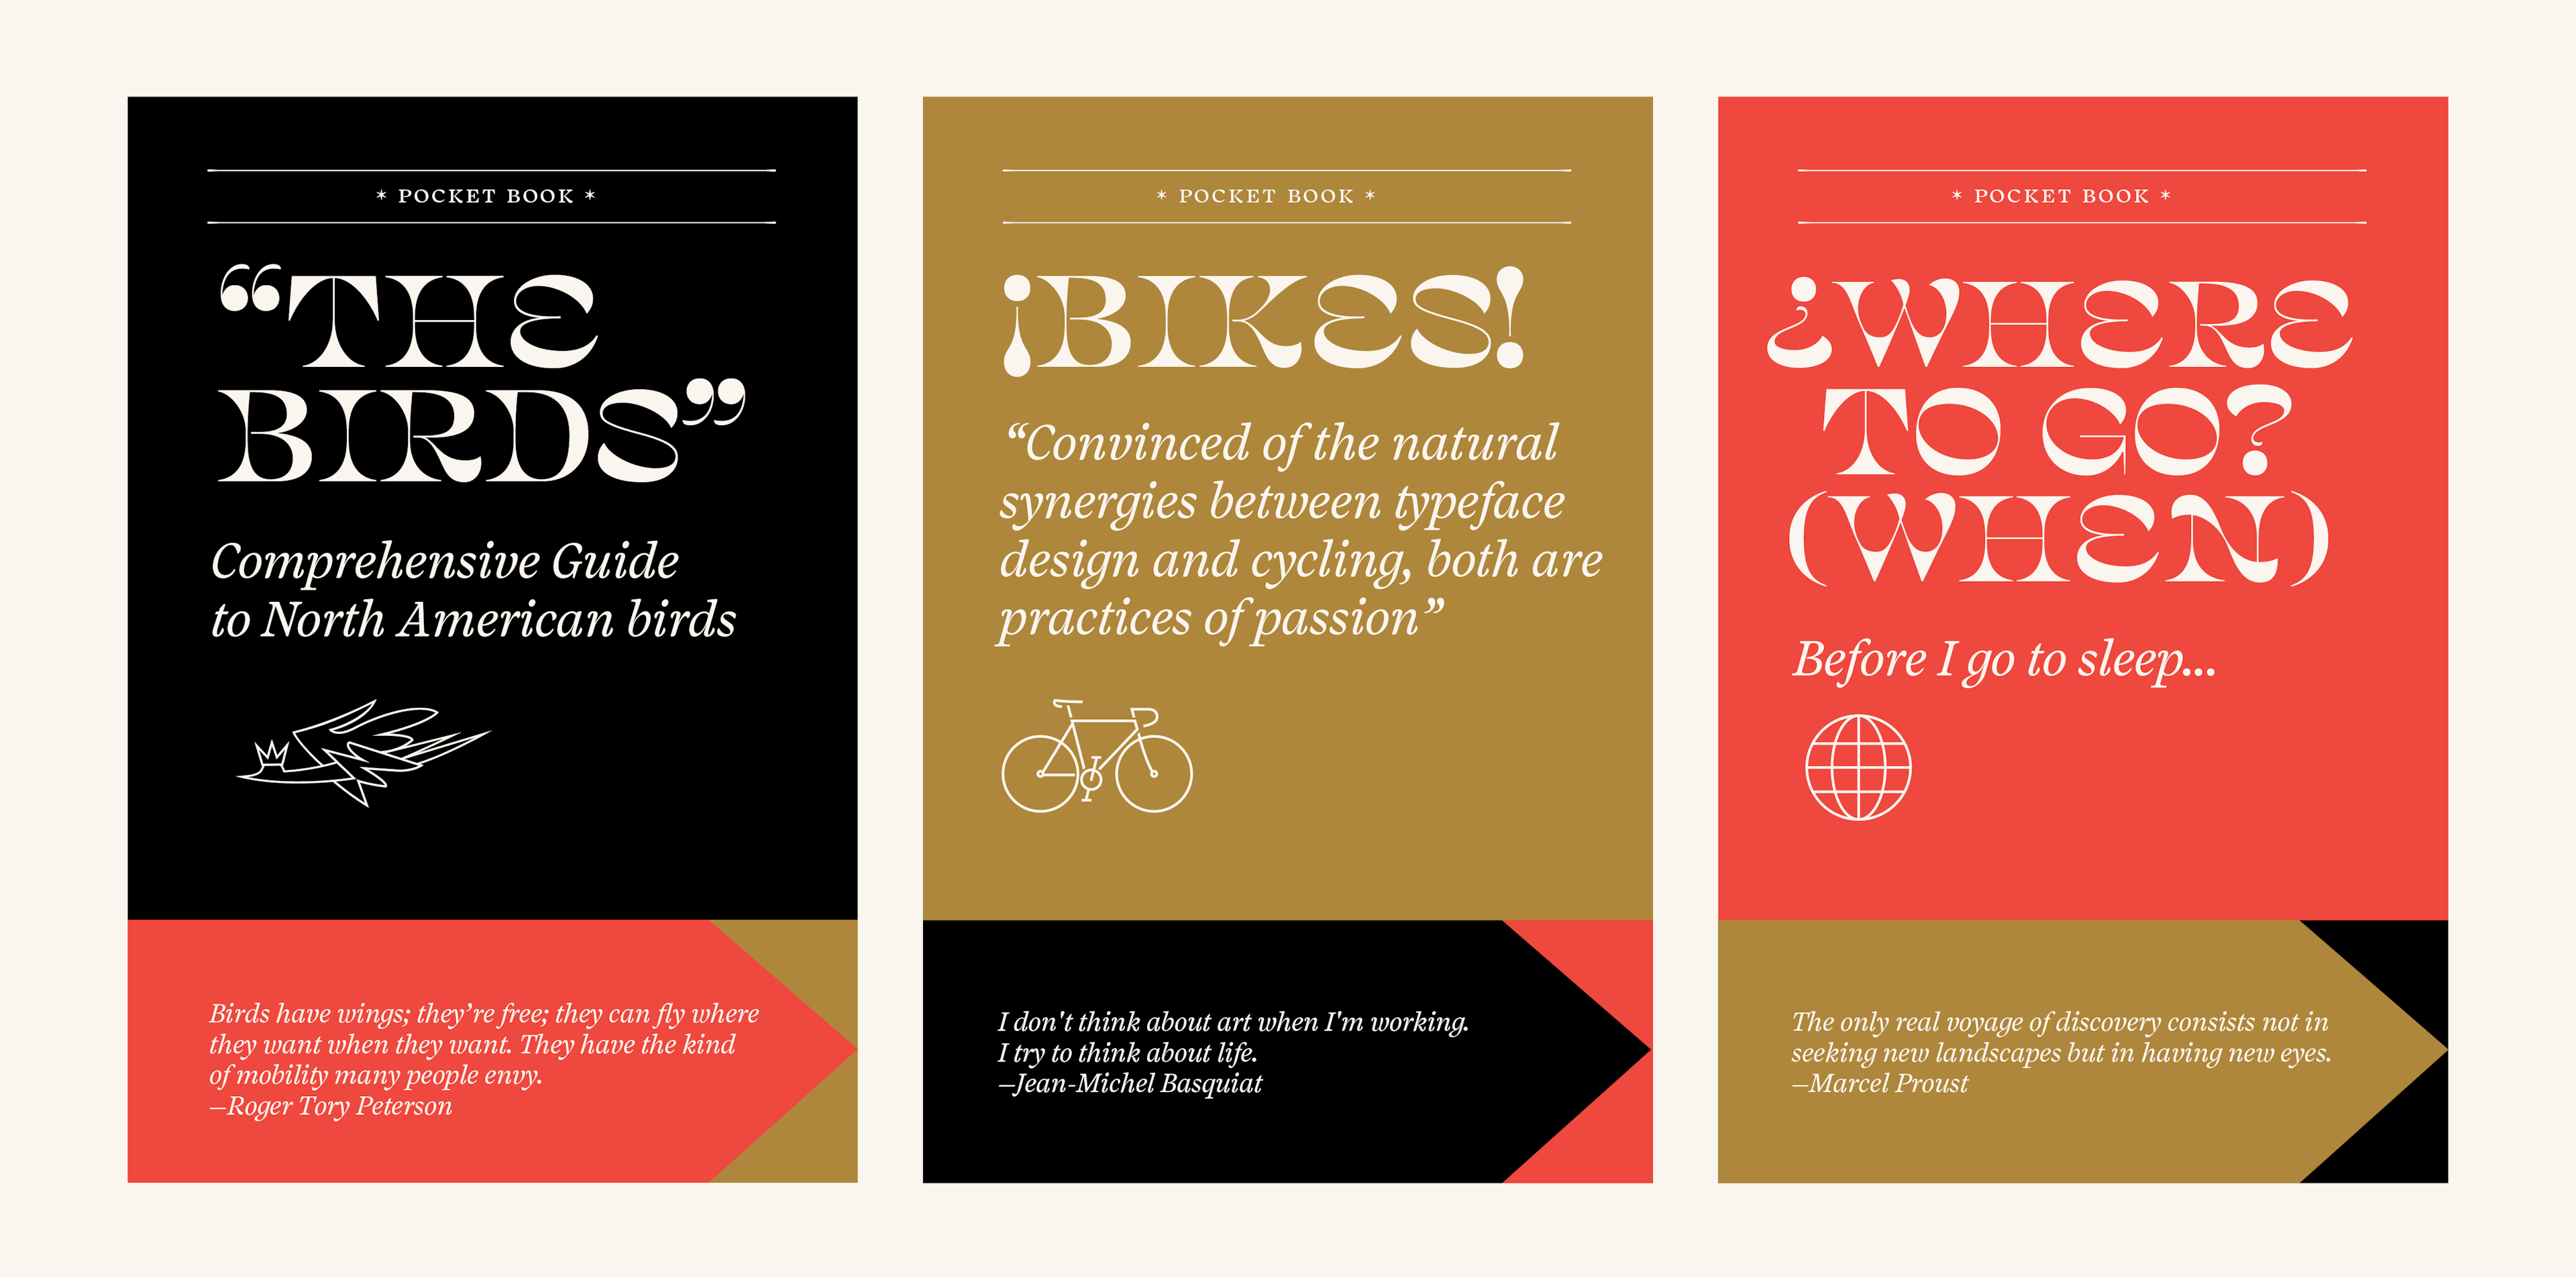 Image of Salvaje typeface project from Cristian Vargas